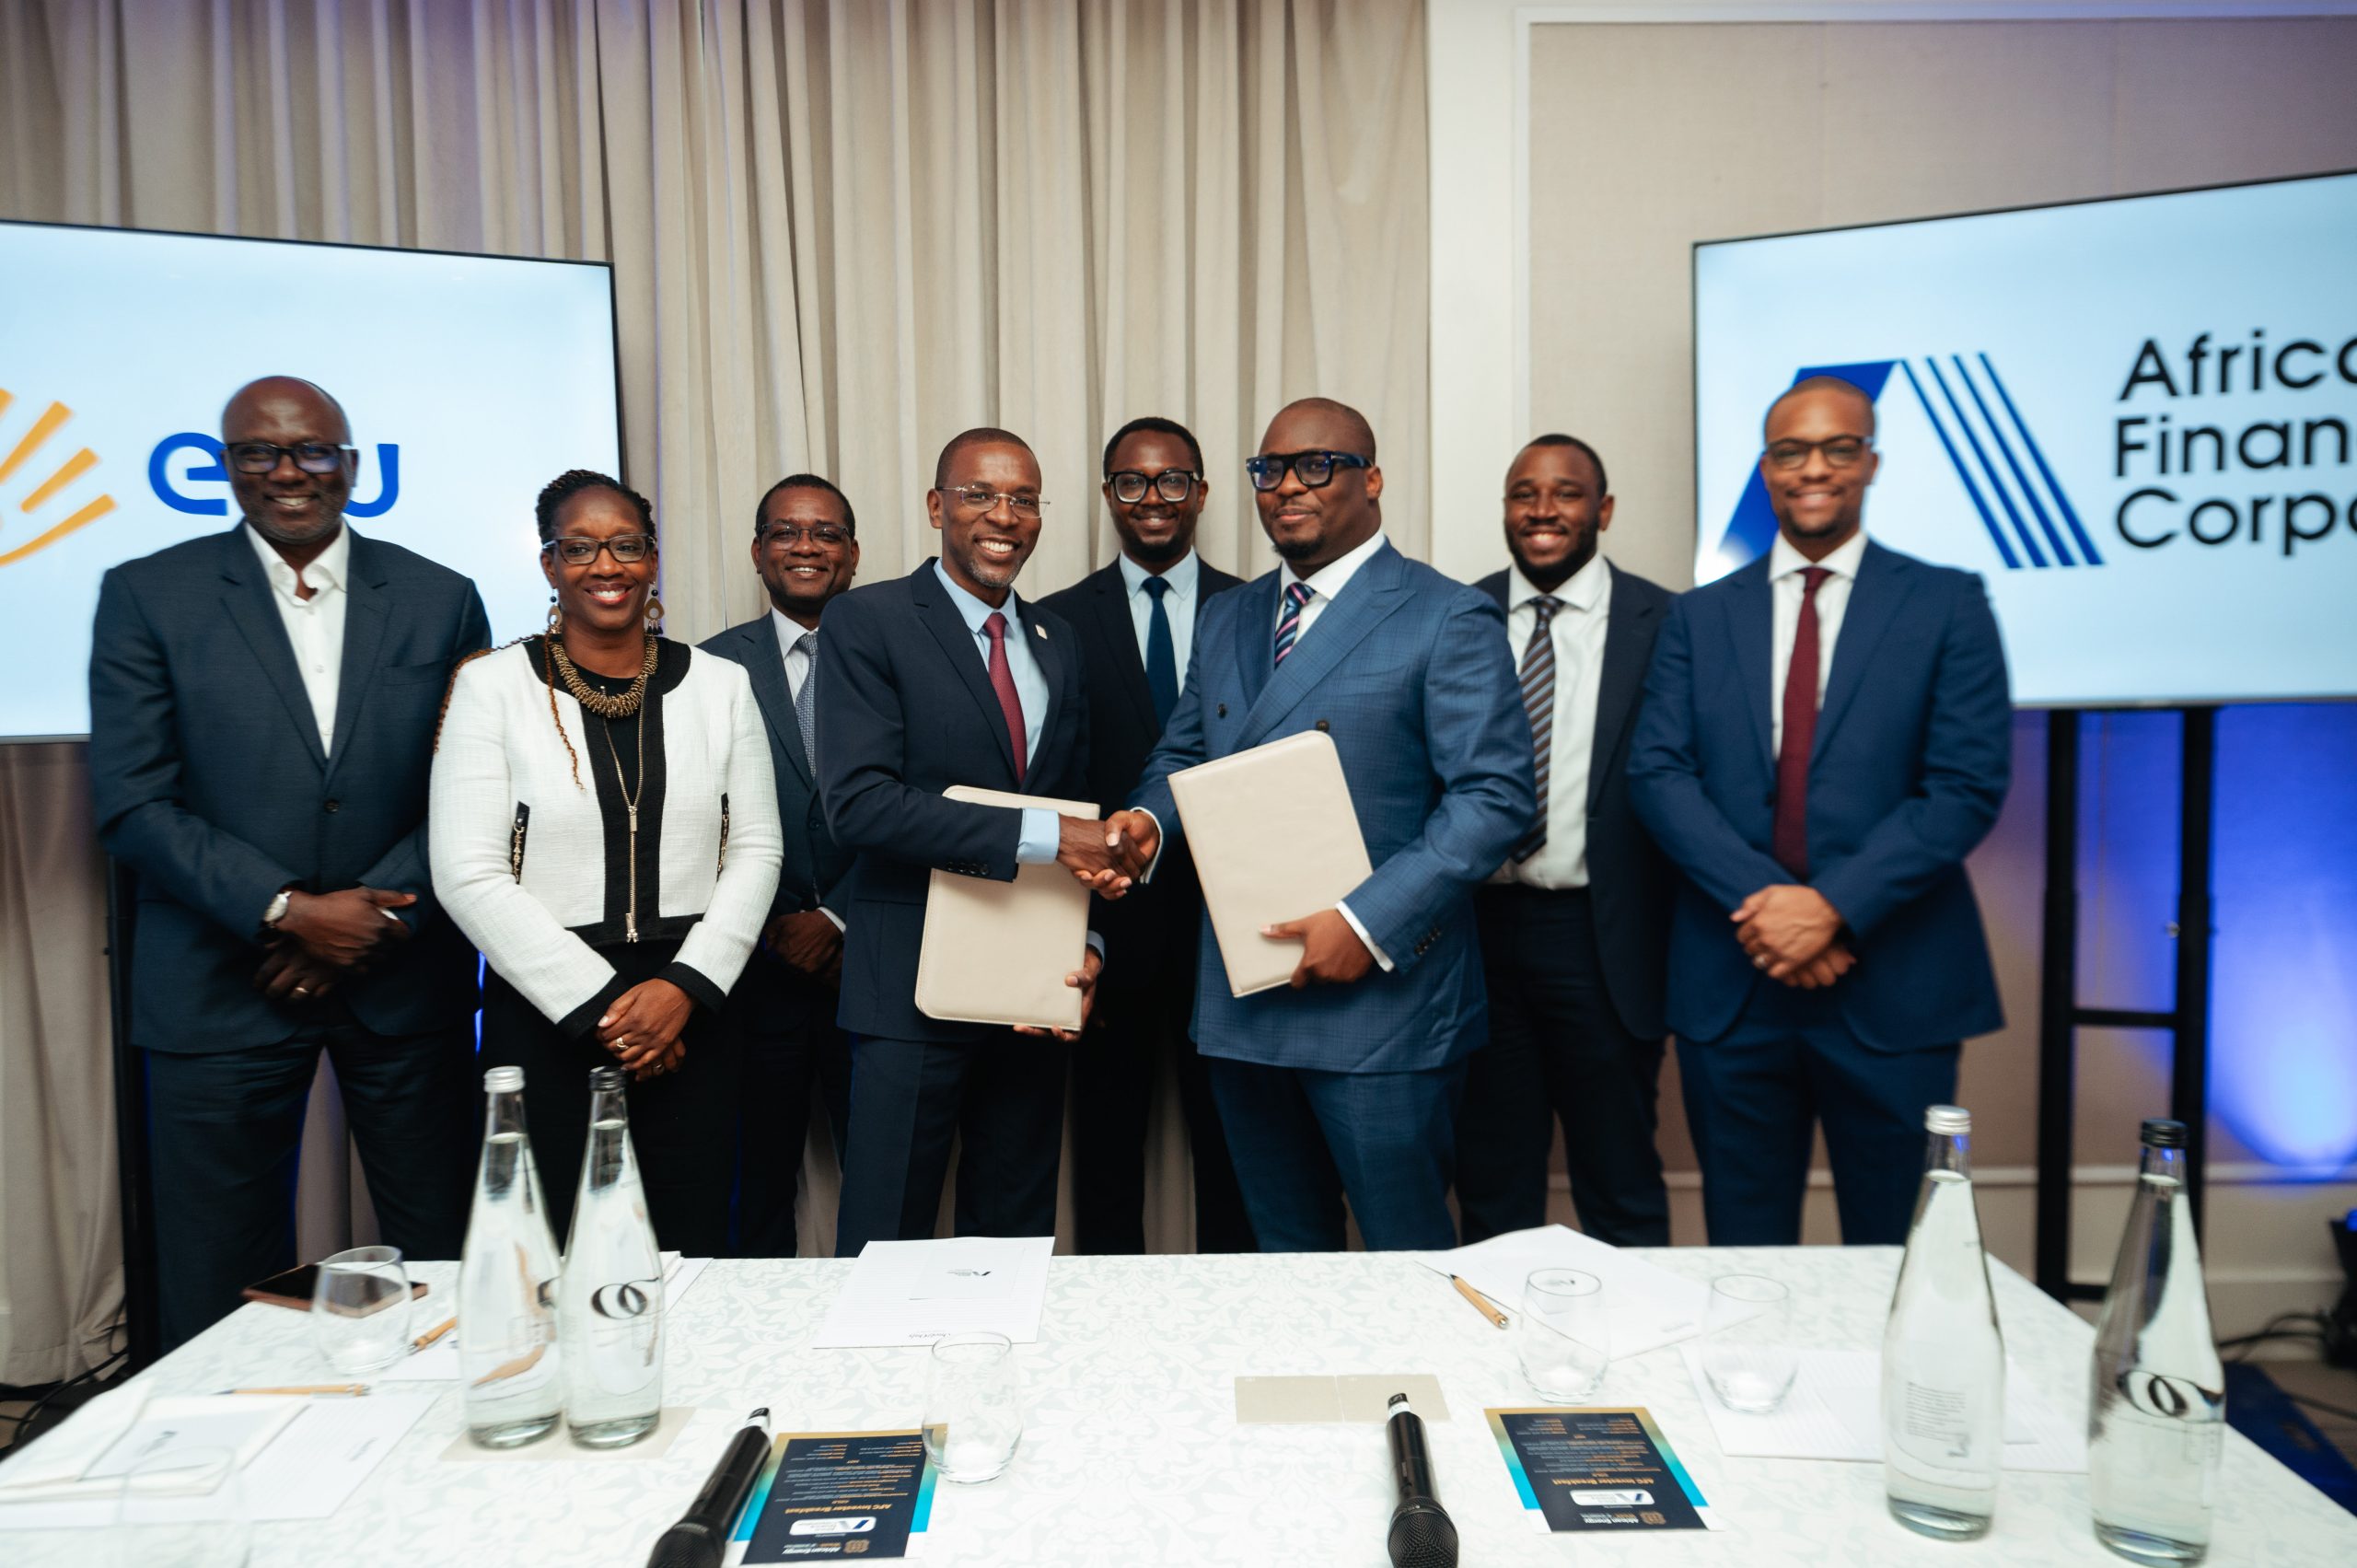 Africa Finance Corporation Invests  Million to Boost Angola’s Indigenous Oil & Gas Production